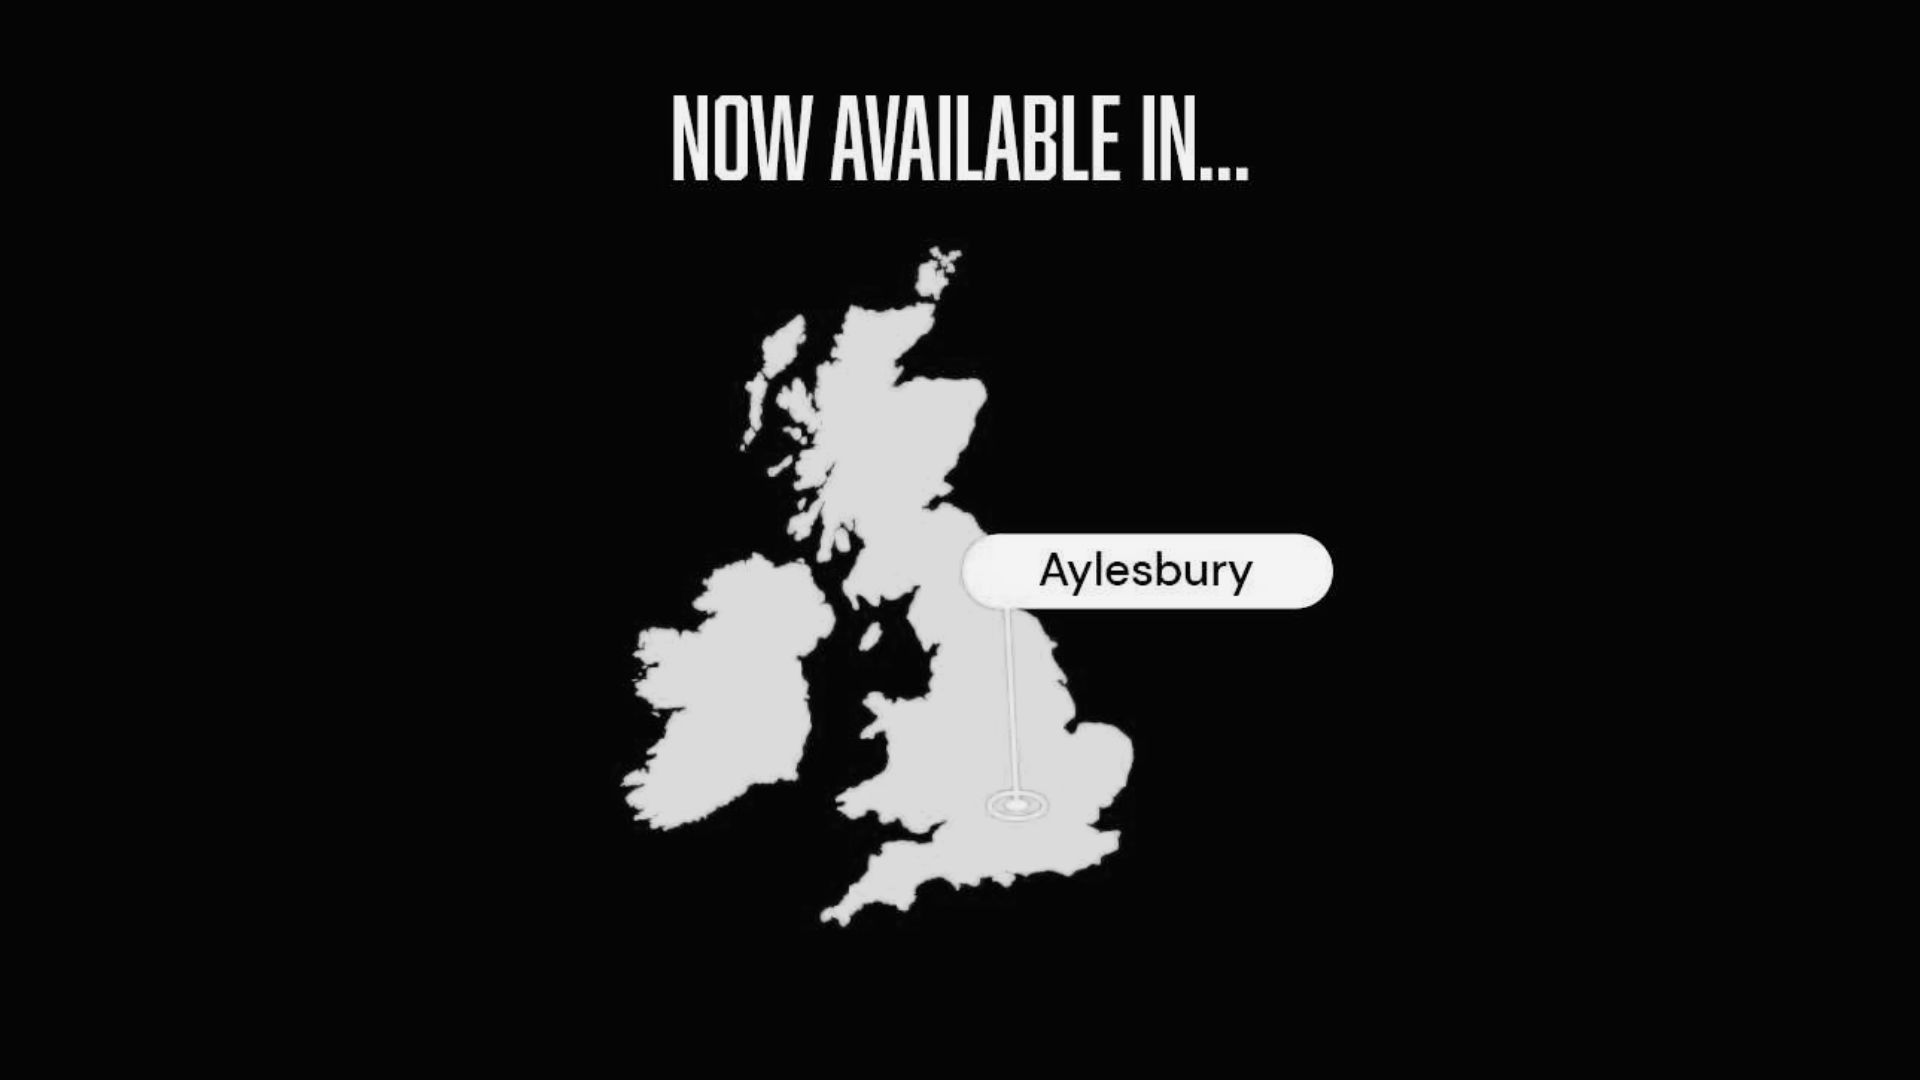 YouFibre Enhances Connectivity for Aylesbury High-Speed Internet Now Accessible